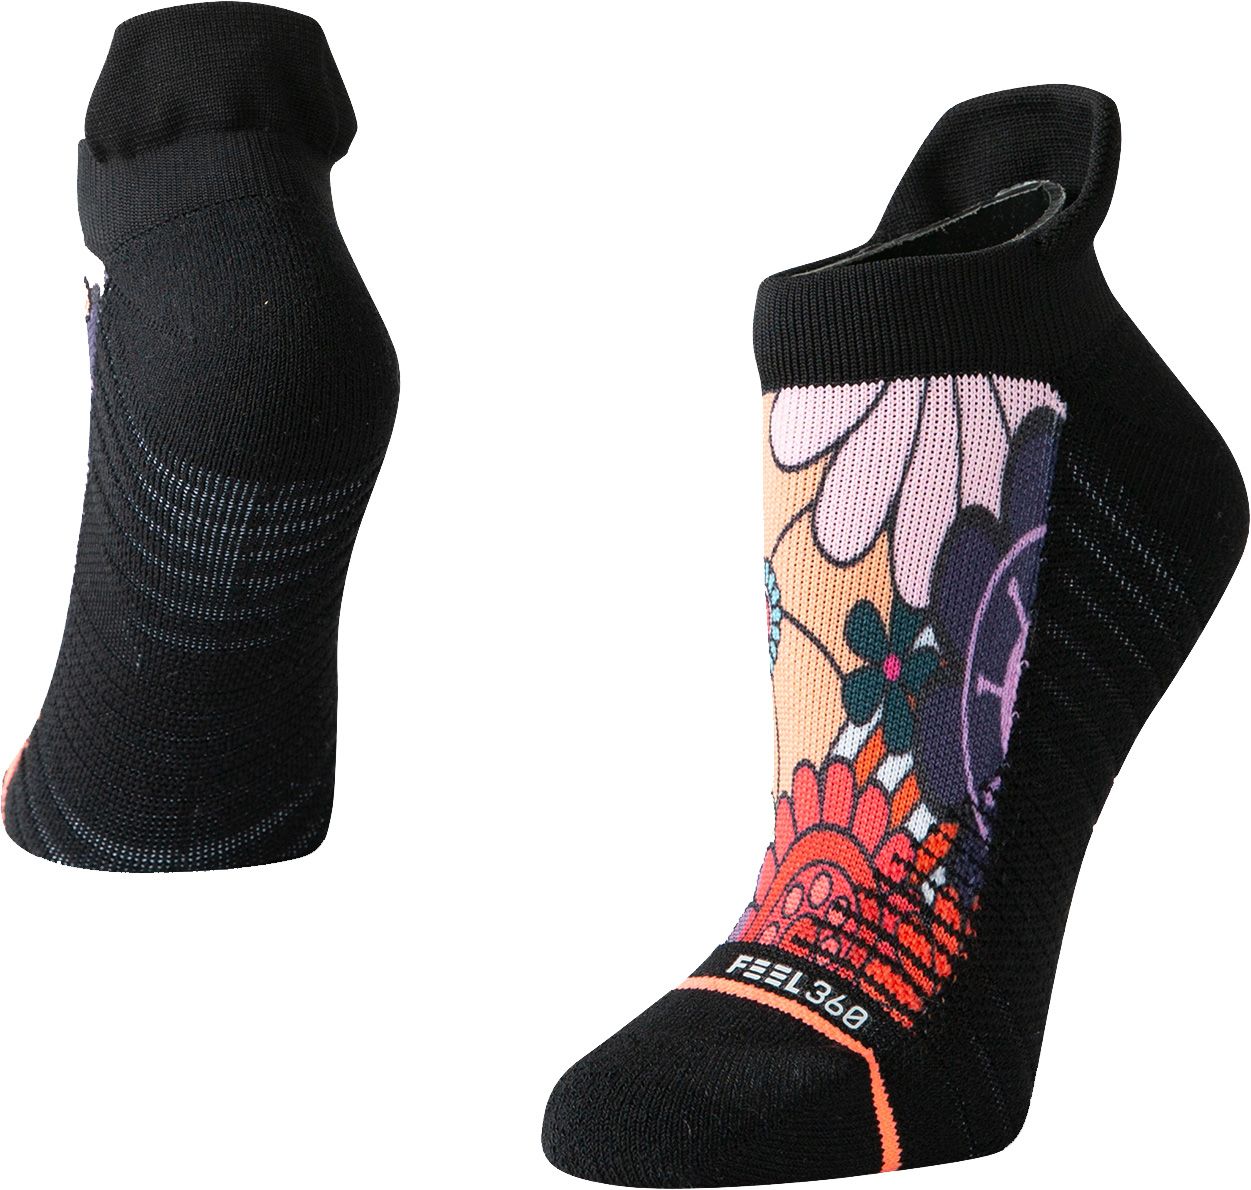 baby doll socks for adults